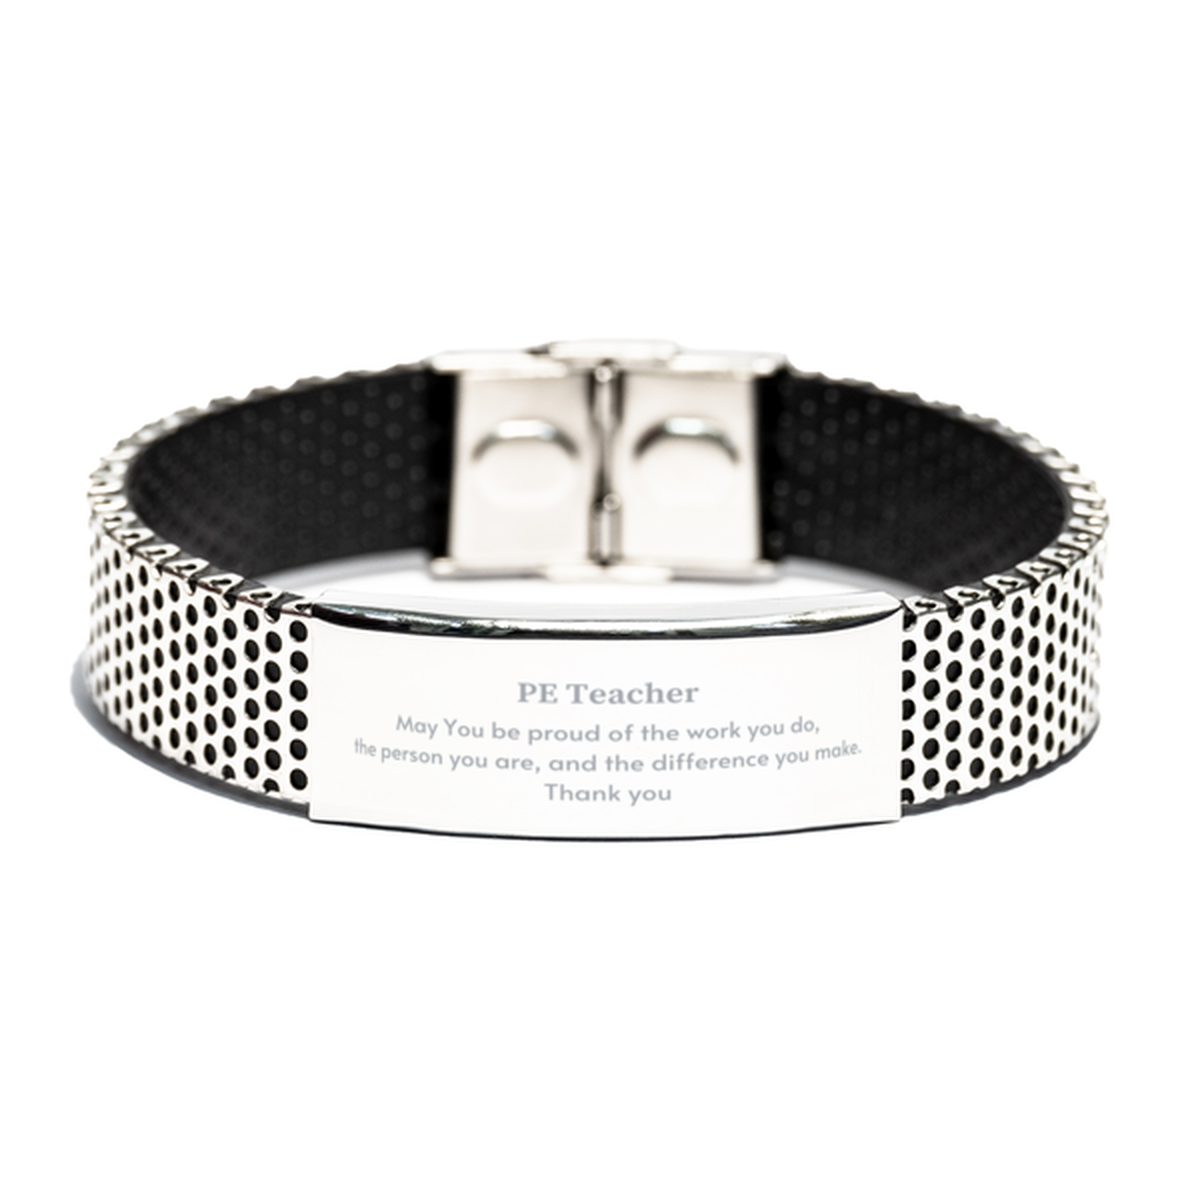 Heartwarming Stainless Steel Bracelet Retirement Coworkers Gifts for PE Teacher, PE Teacher May You be proud of the work you do, the person you are Gifts for Boss Men Women Friends